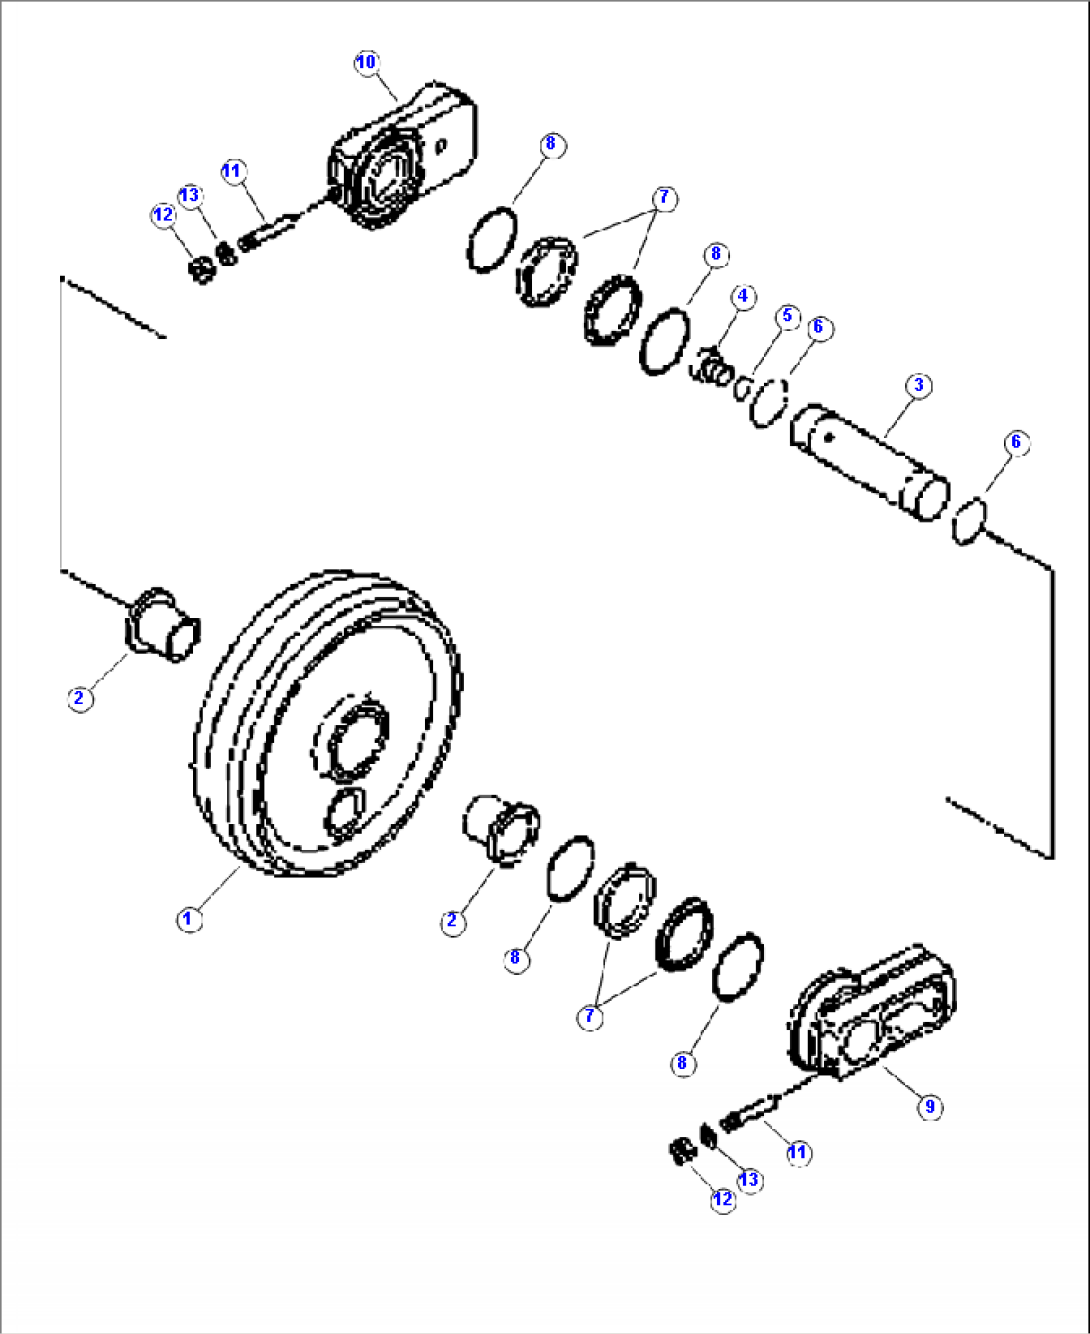 R0110-01A0 FRONT IDLER